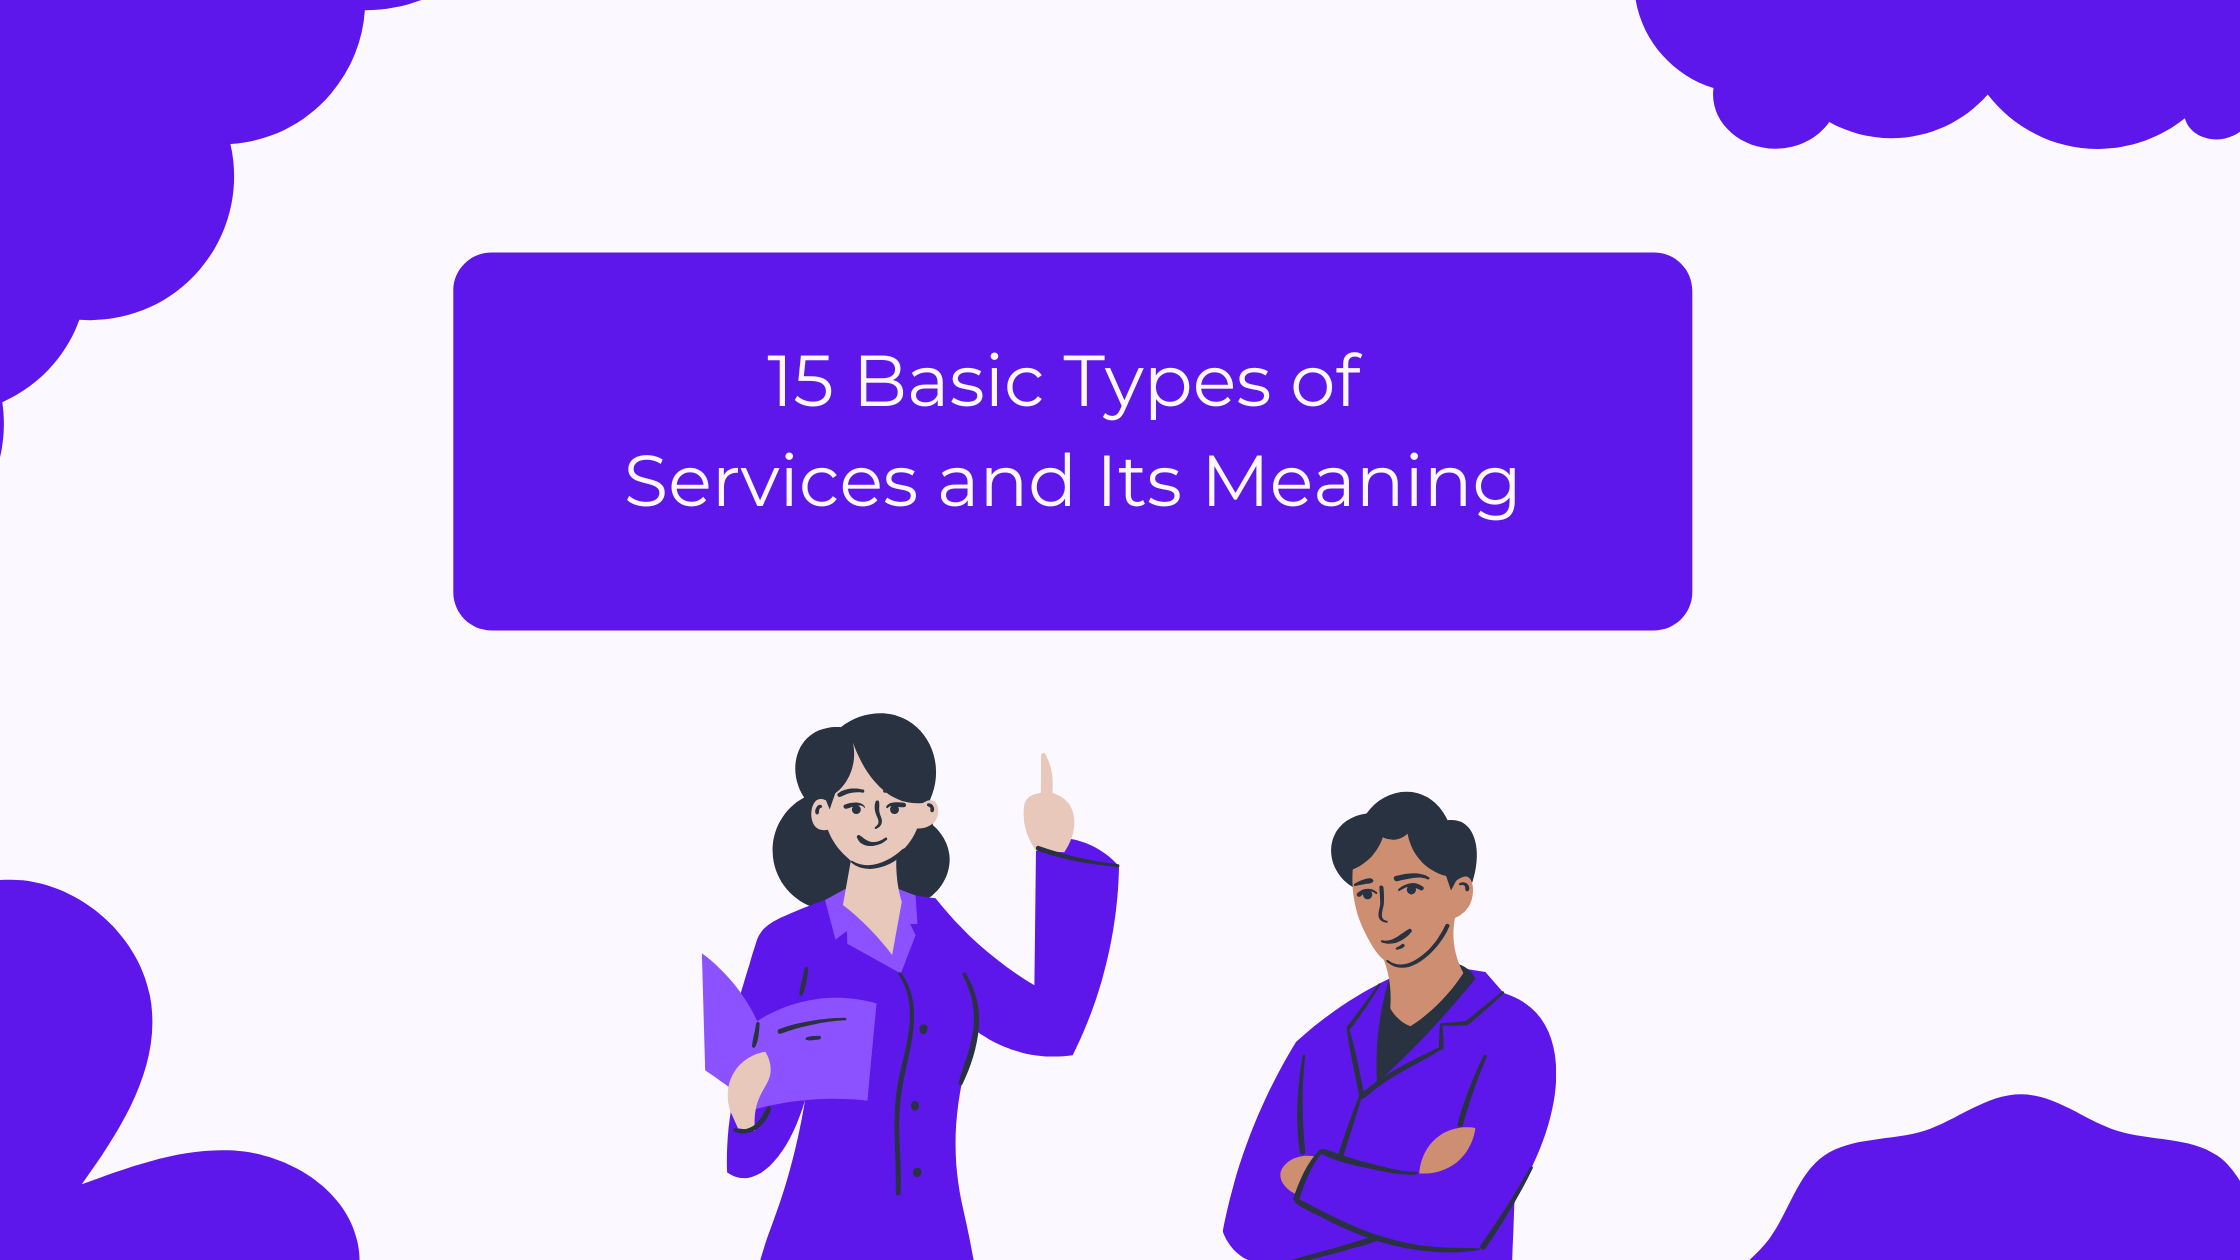 15 Basic Types of Services and Its Meaning